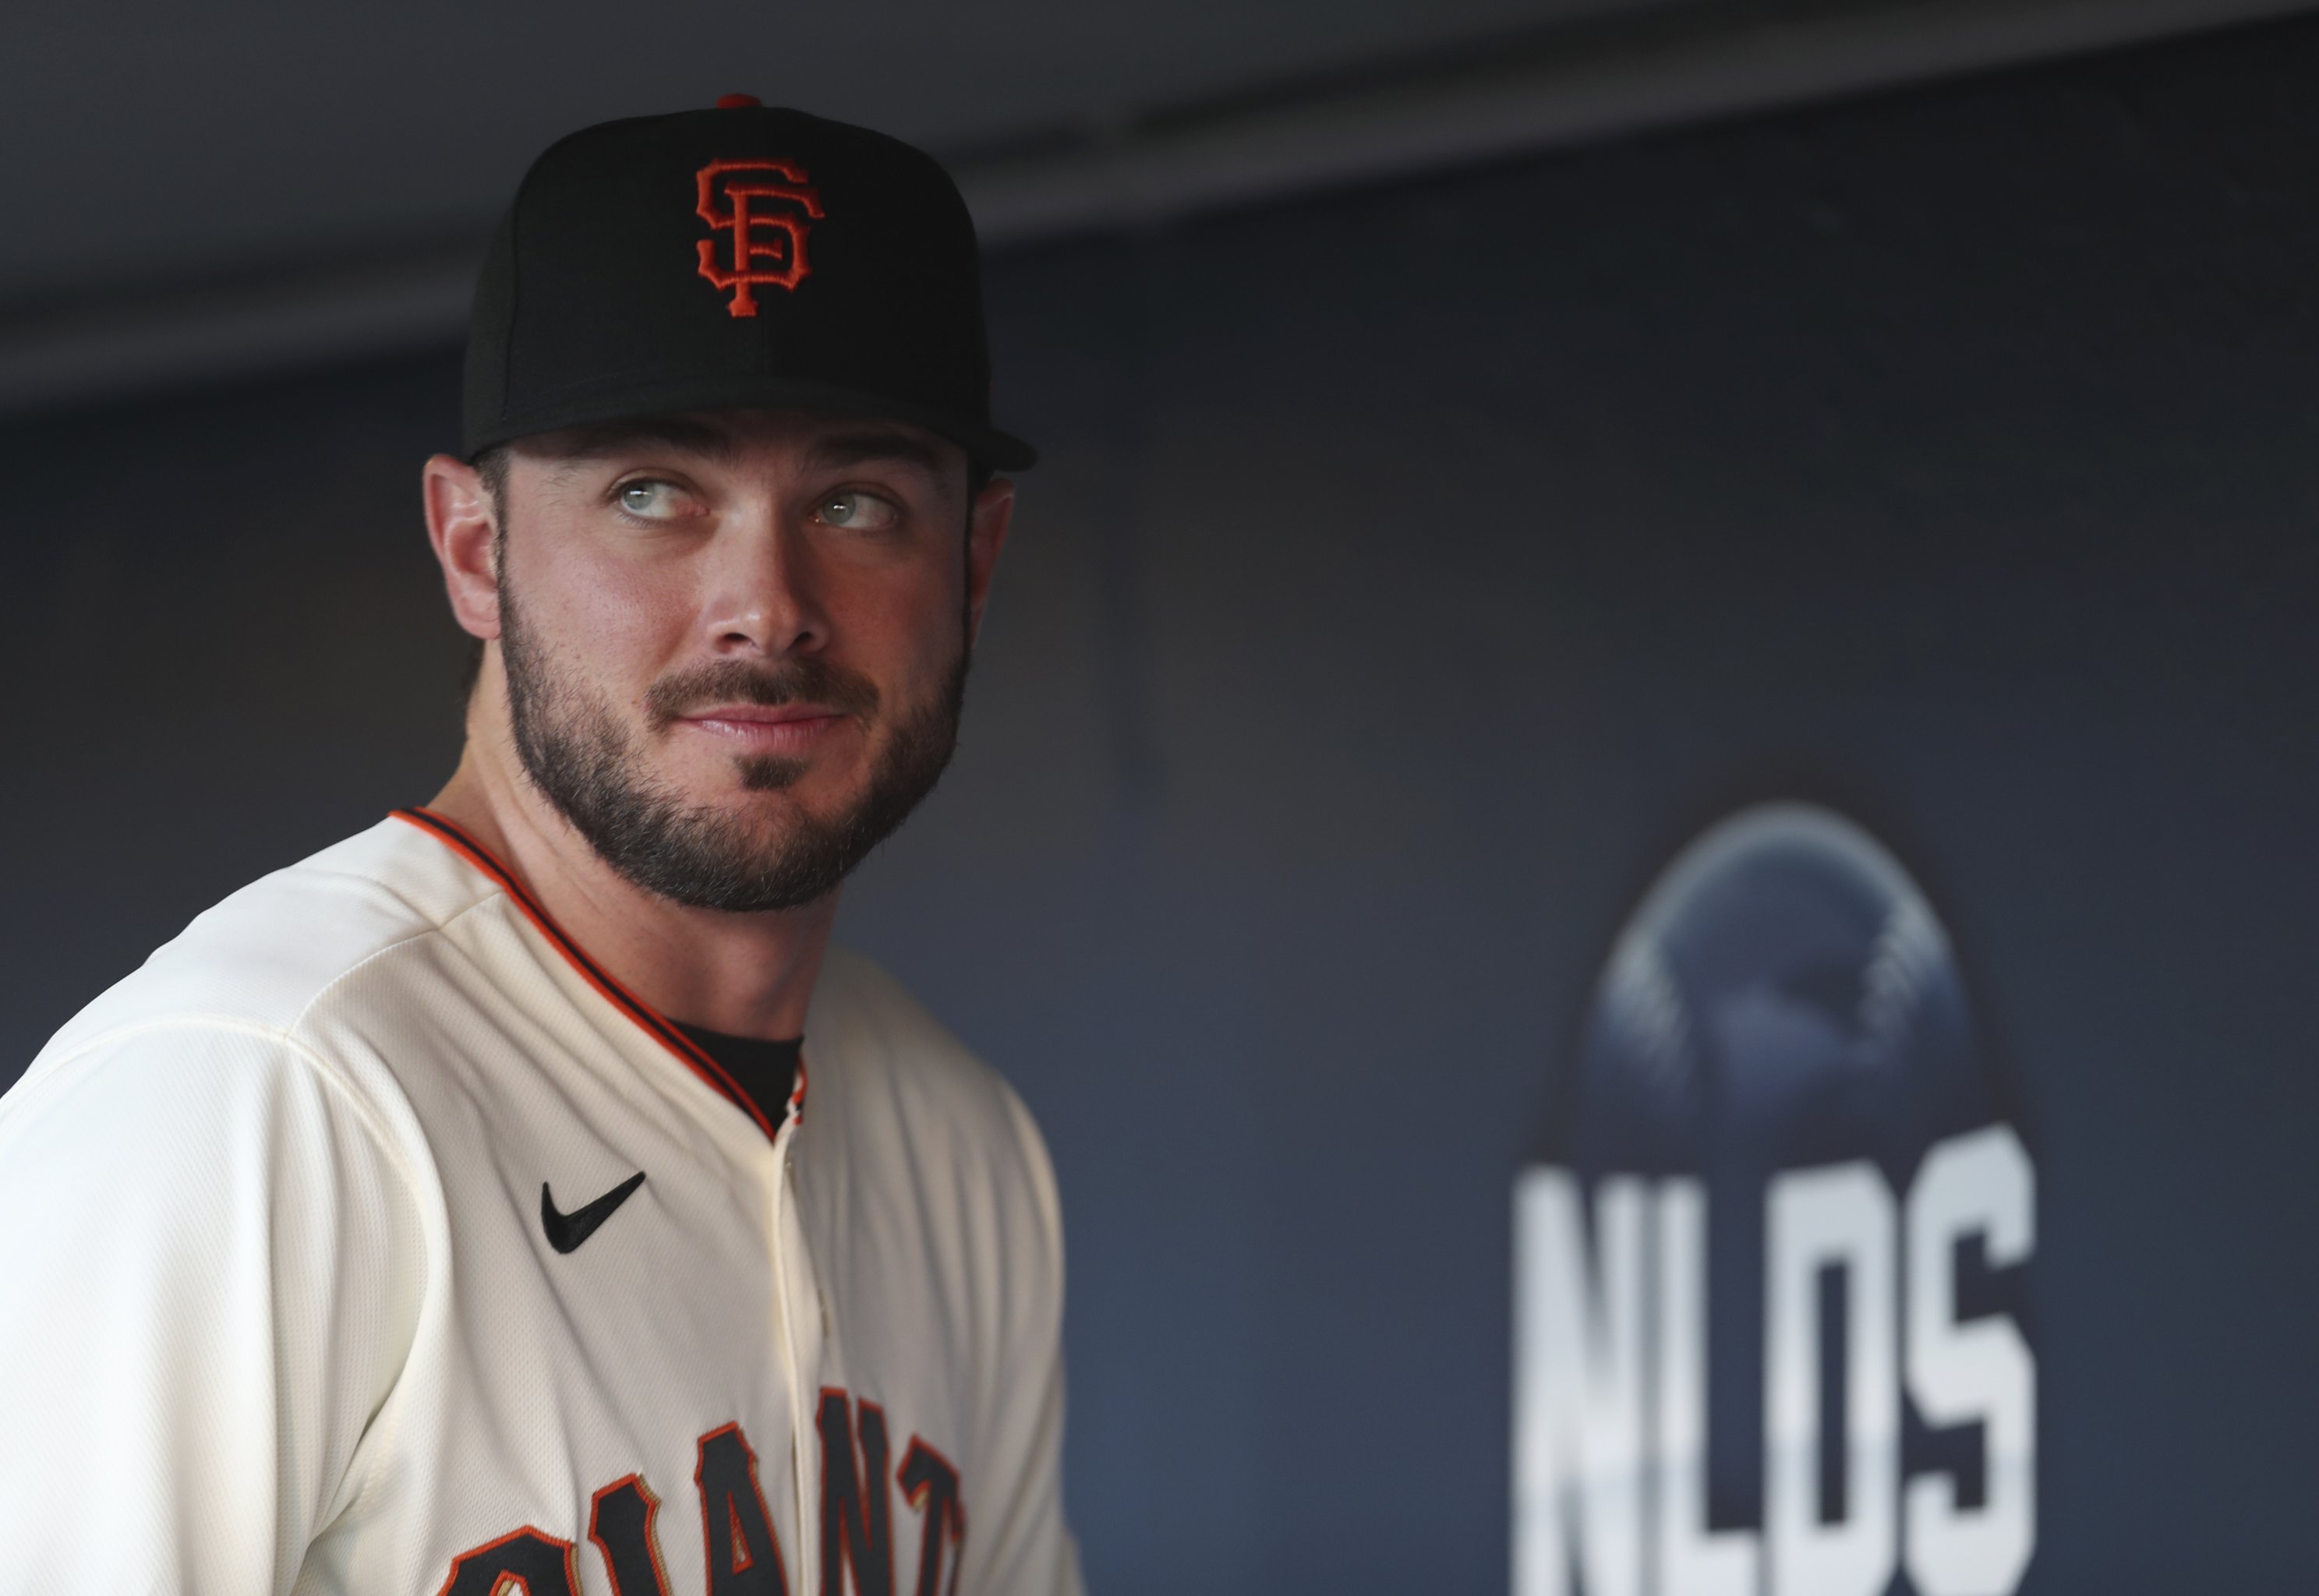 Should the Detroit Tigers be considering signing Kris Bryant?